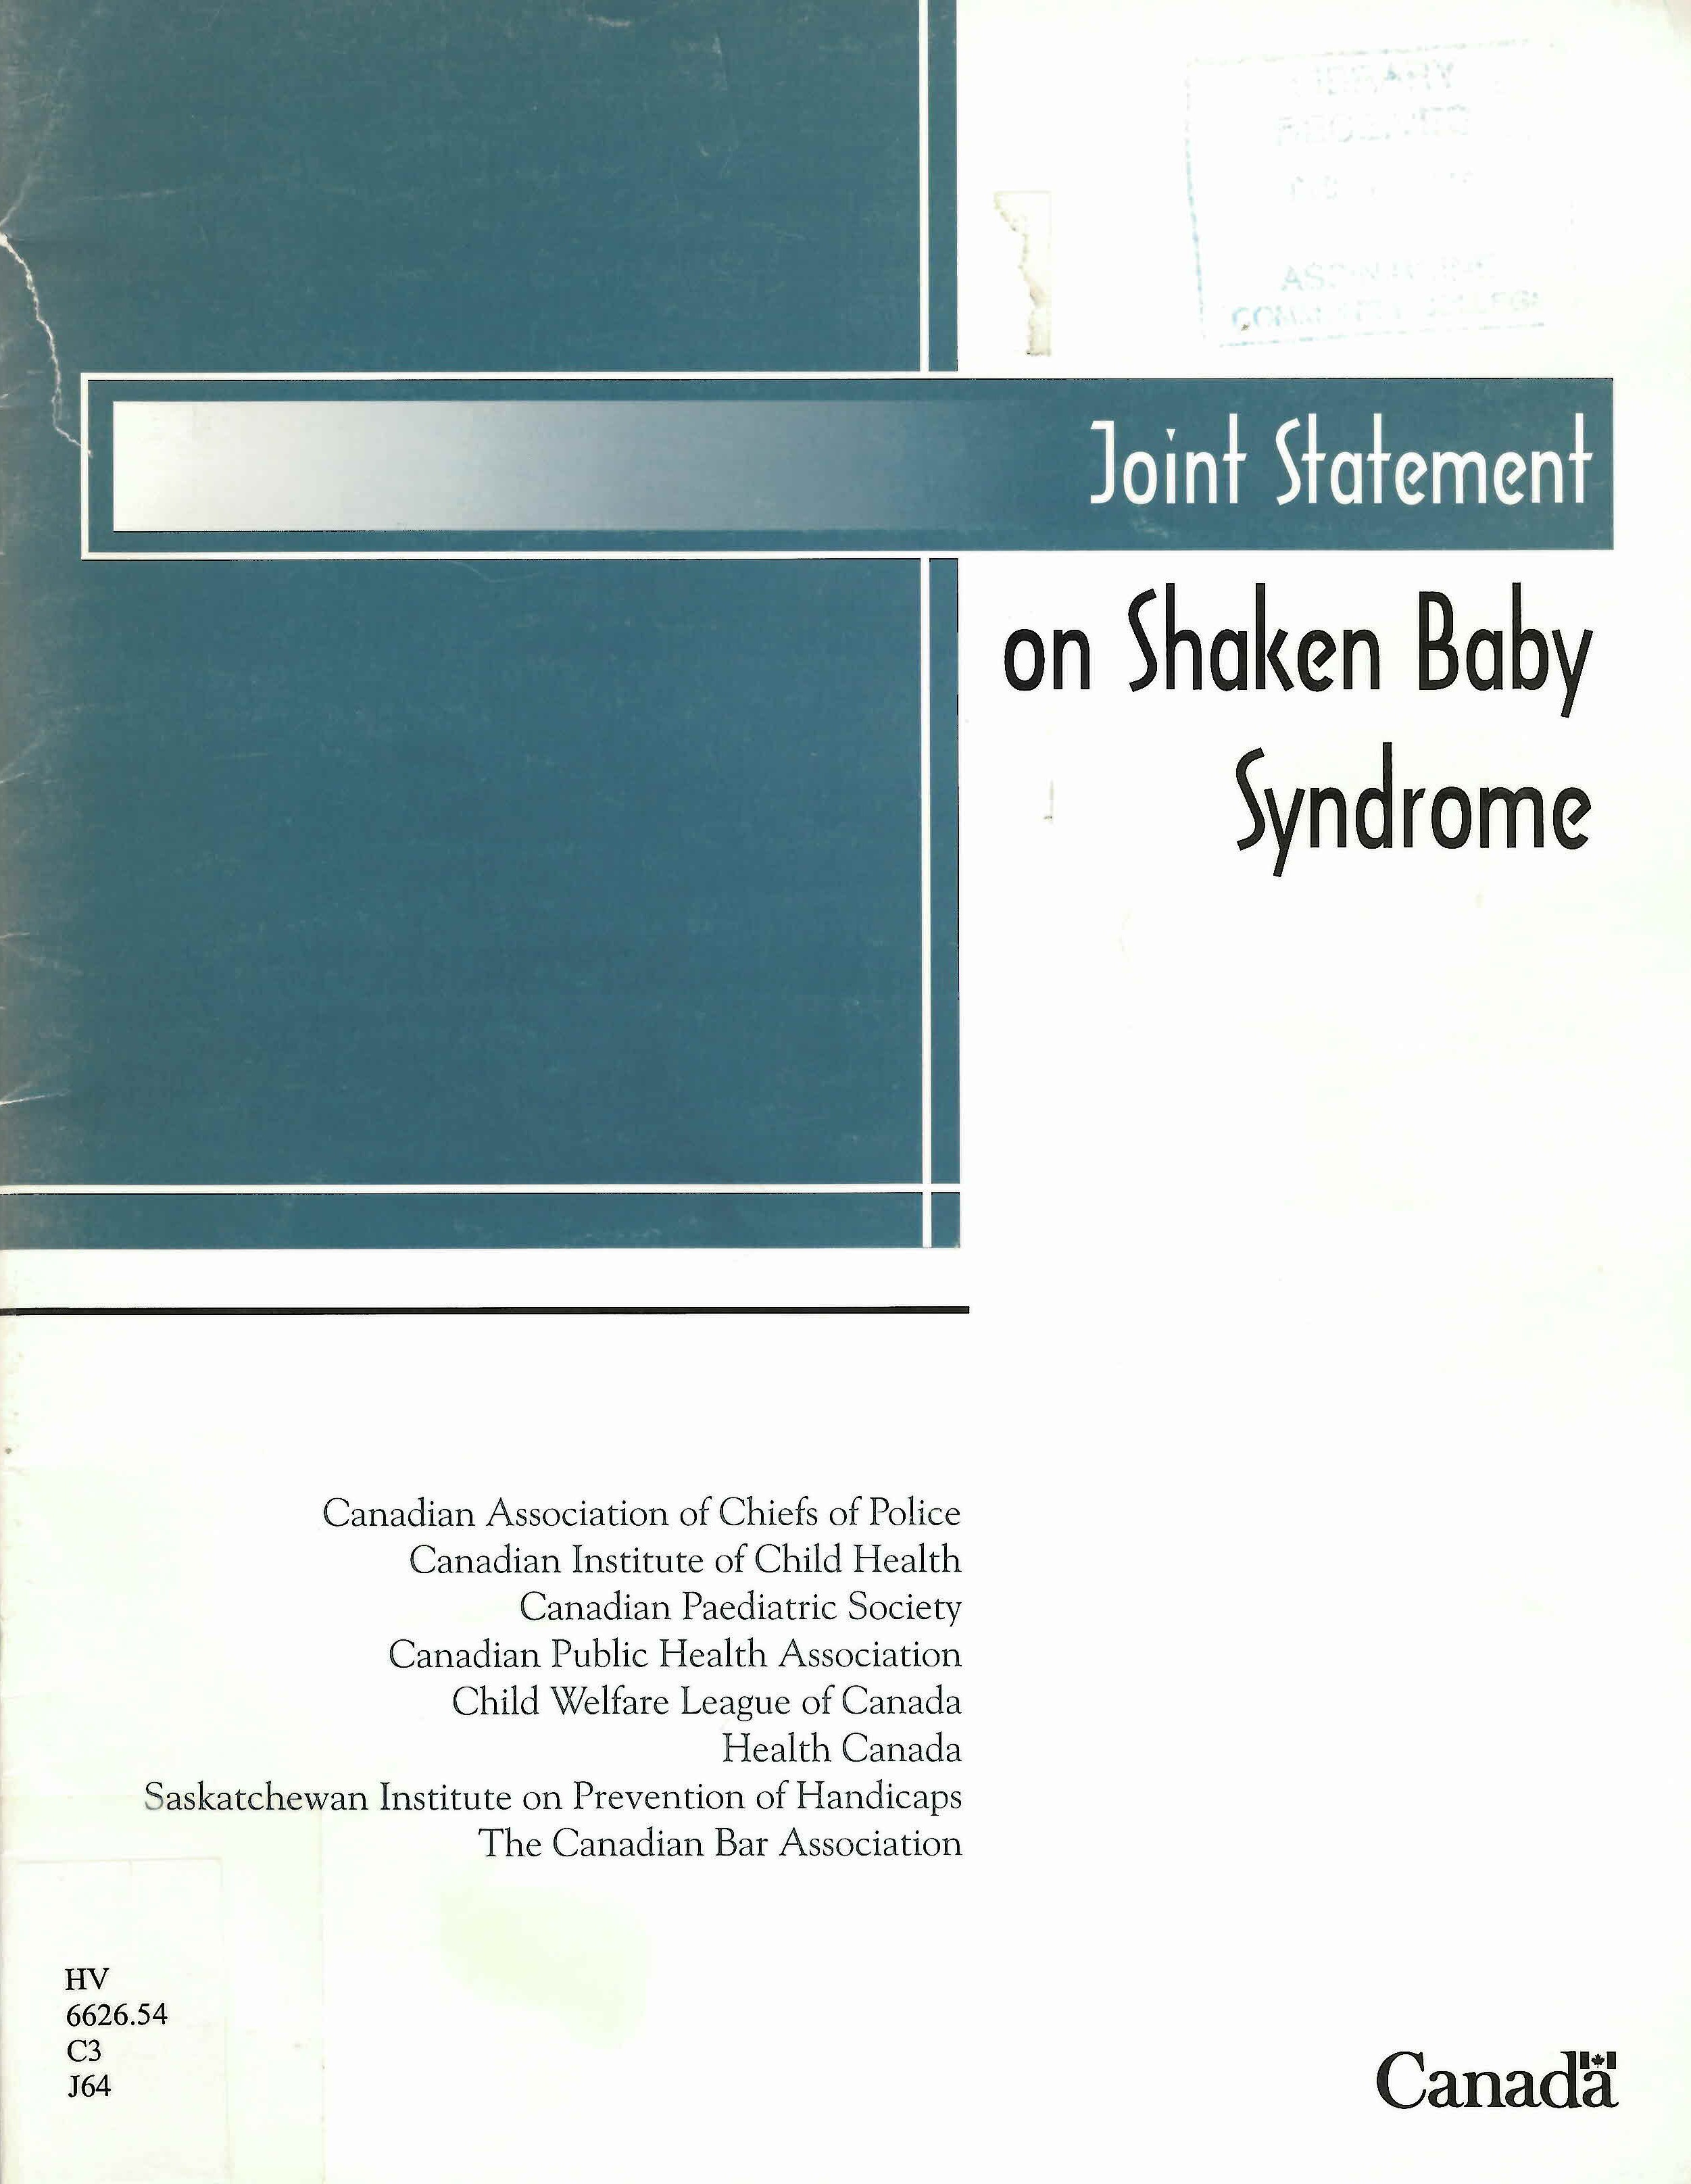 Joint statement on shaken baby syndrome